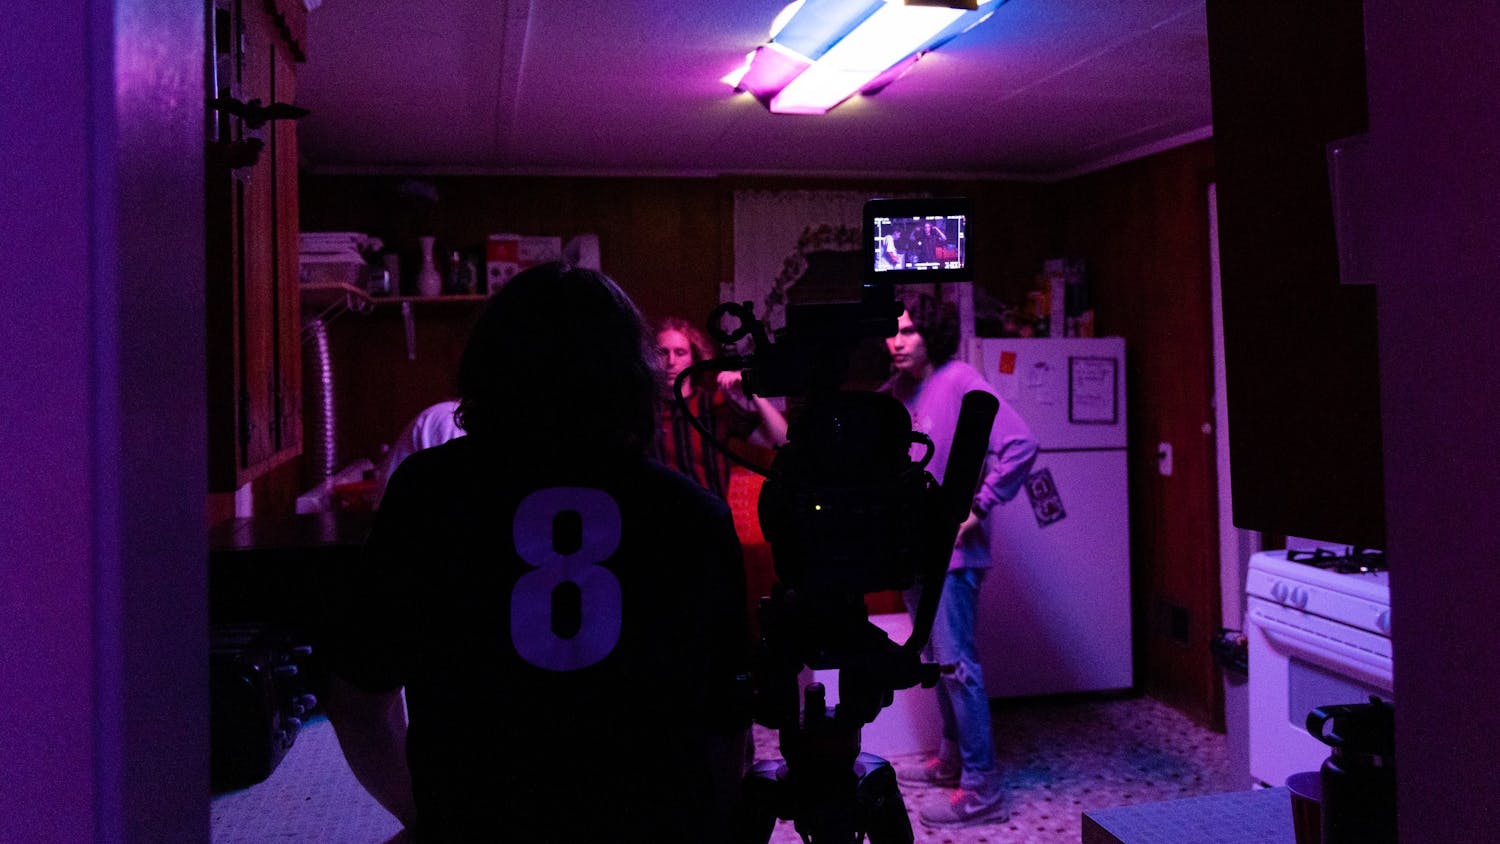 USC alumnus John Slice gives instructions from behind the camera during a party scene on June 16, 2022. Slice and his friends finished filming their first feature film, "To What End," on June 24.&nbsp;